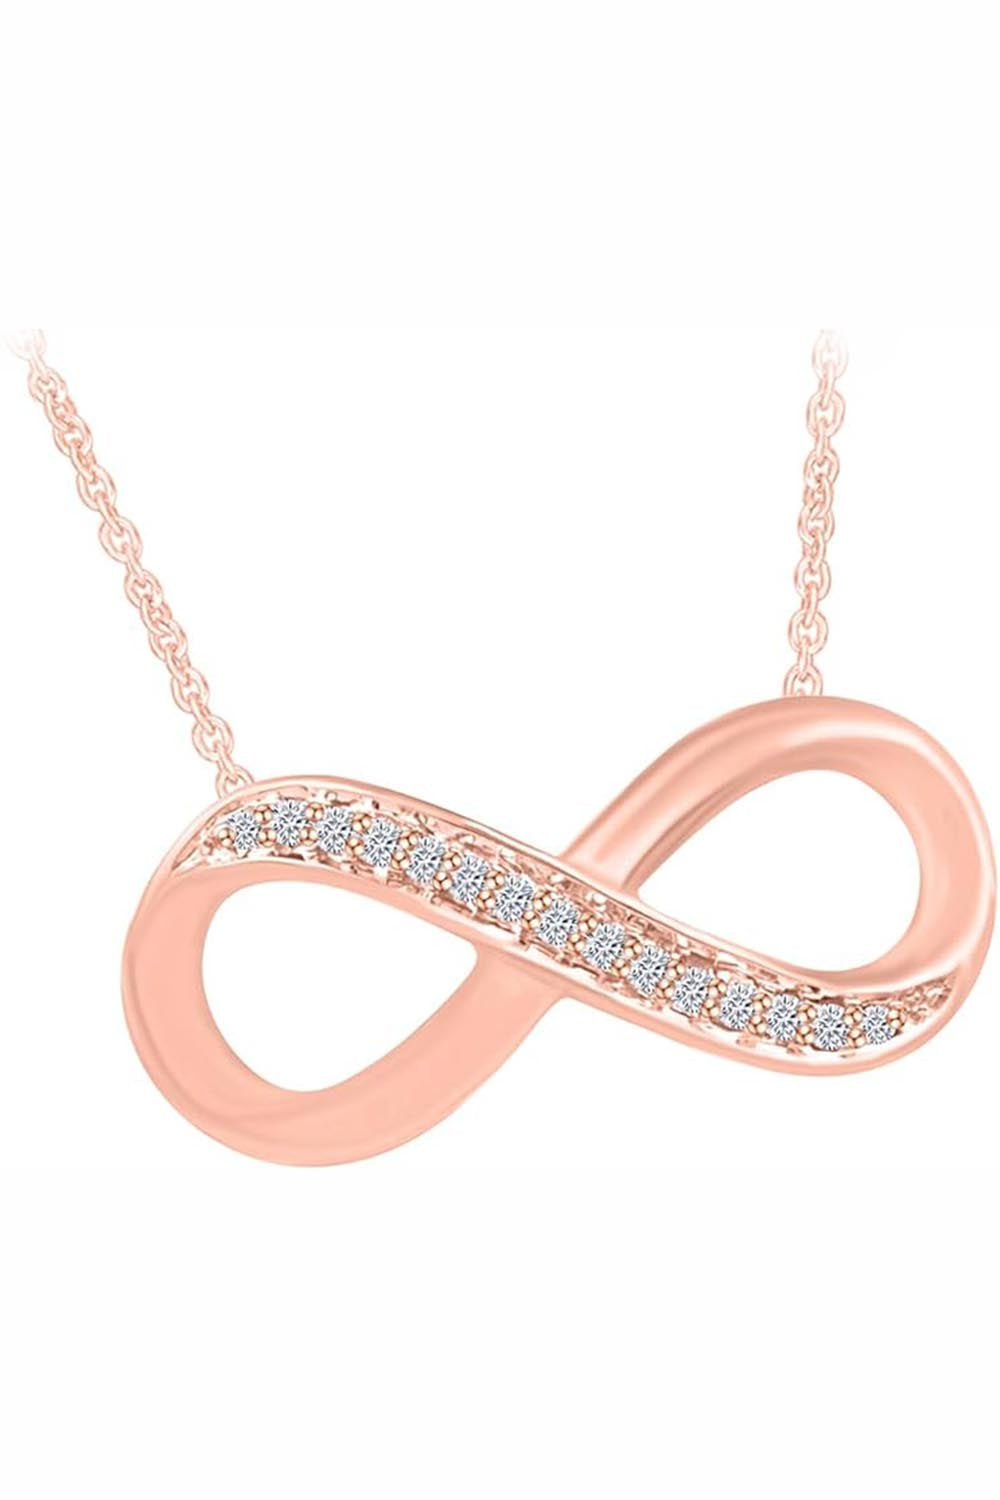 Rose Gold Color Yaathi Infinity Necklace, Women's Pendant Necklace